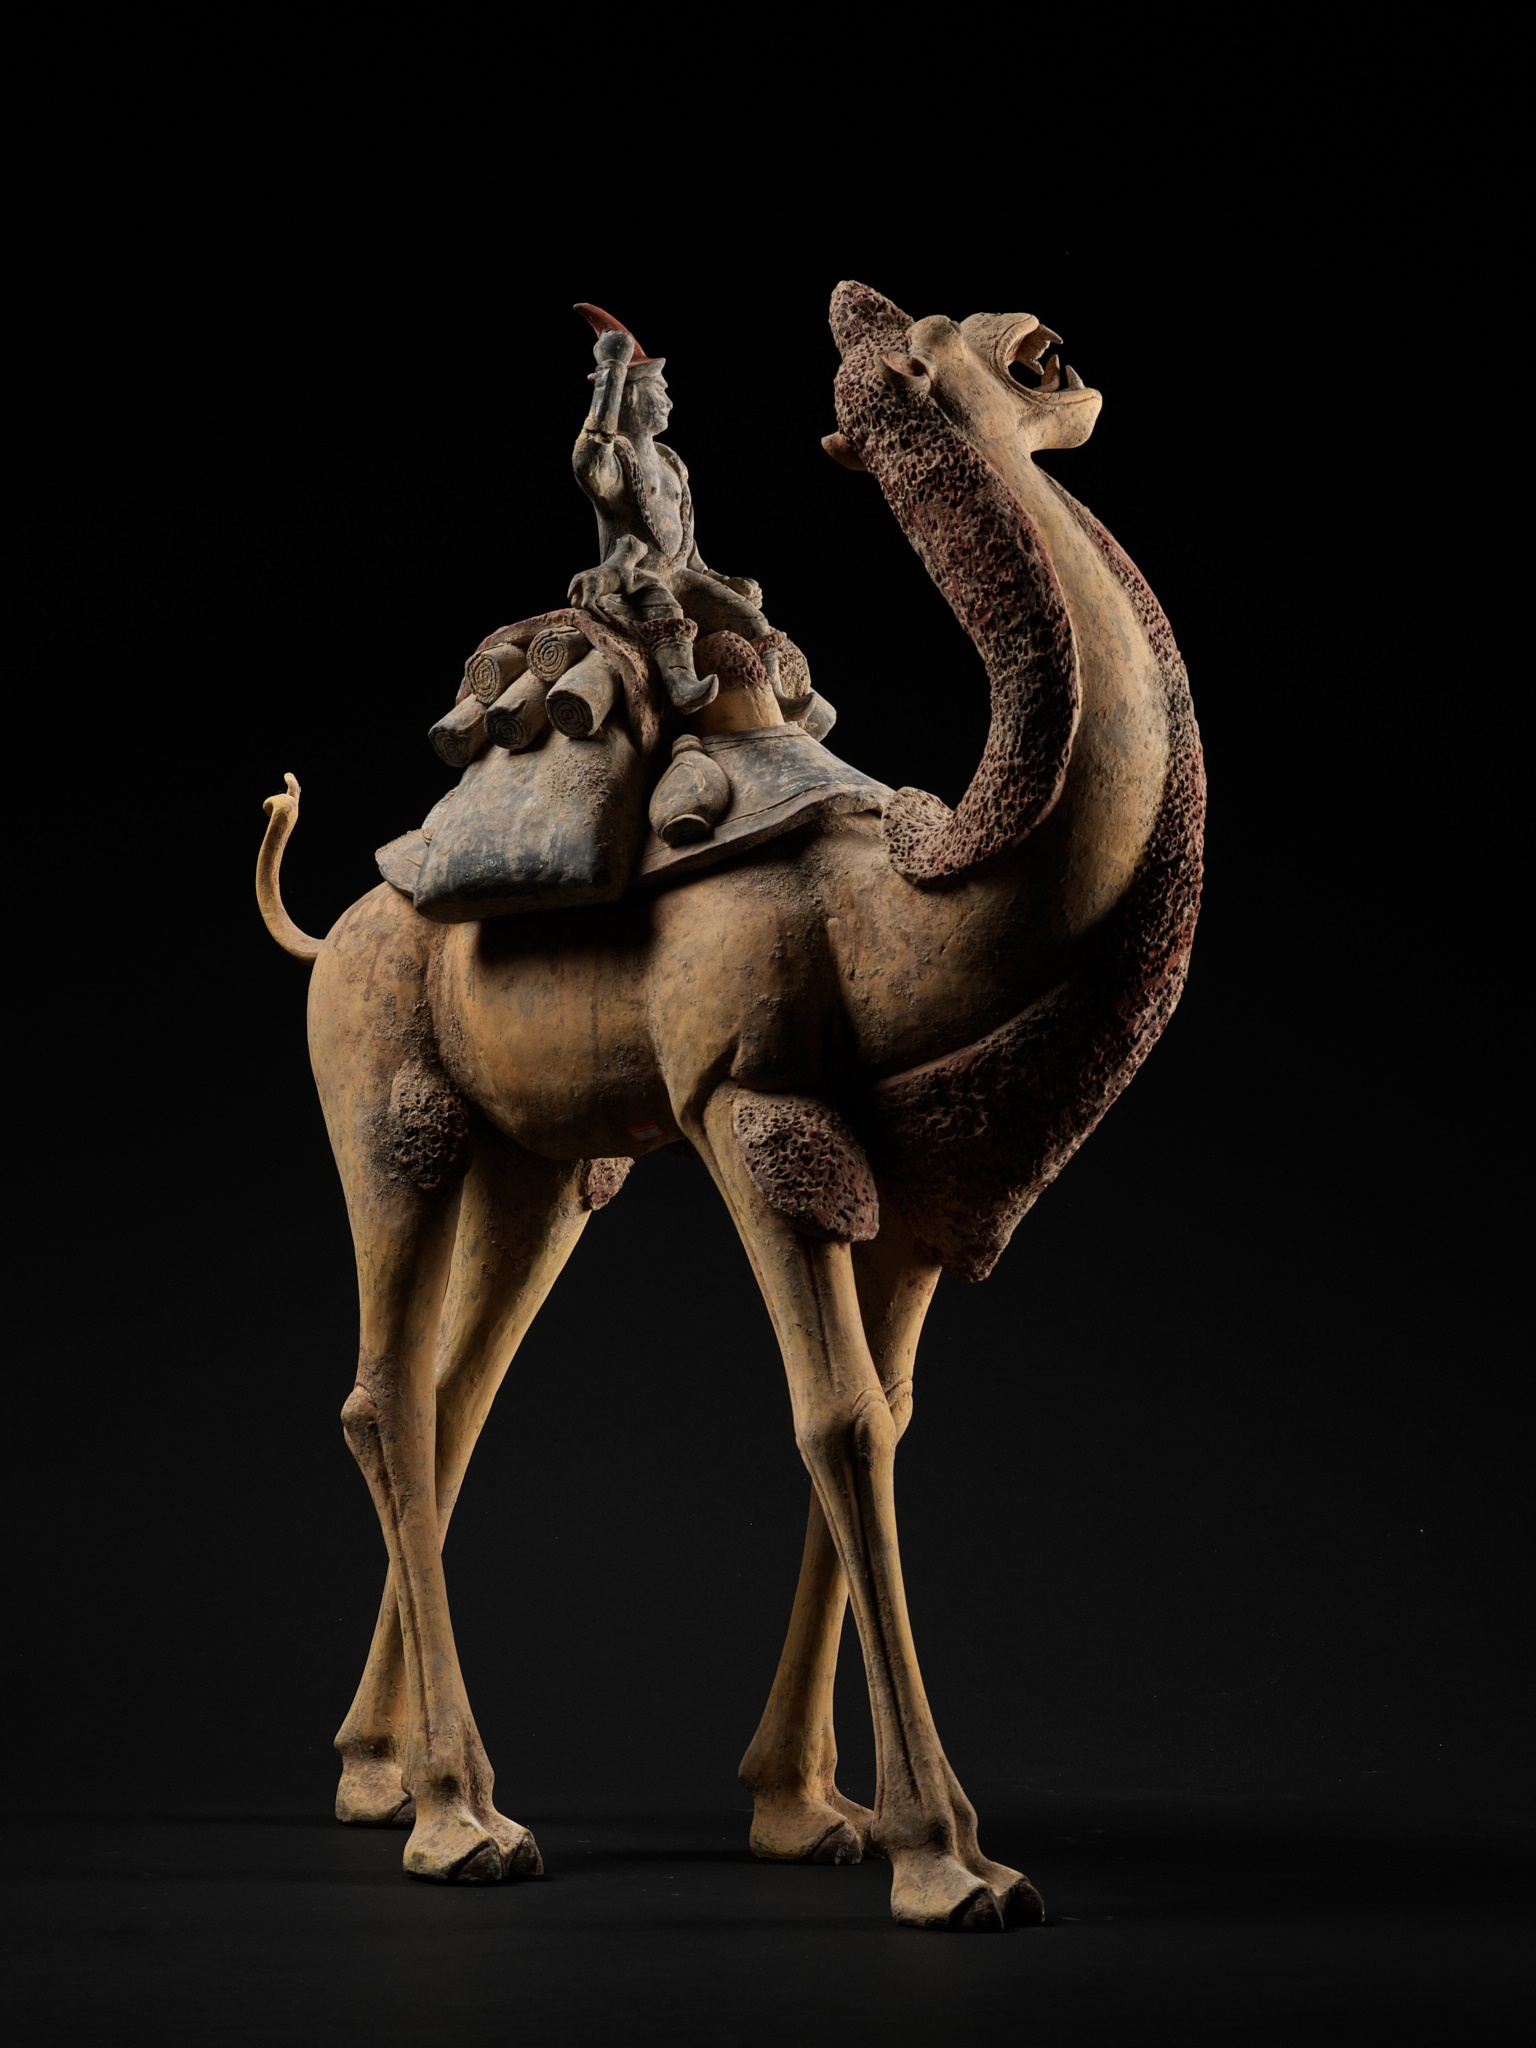 AN EXCEPTIONALLY LARGE PAINTED POTTERY FIGURE OF A BACTRIAN CAMEL AND A SOGDIAN RIDER, TANG DYNASTY - Image 12 of 12